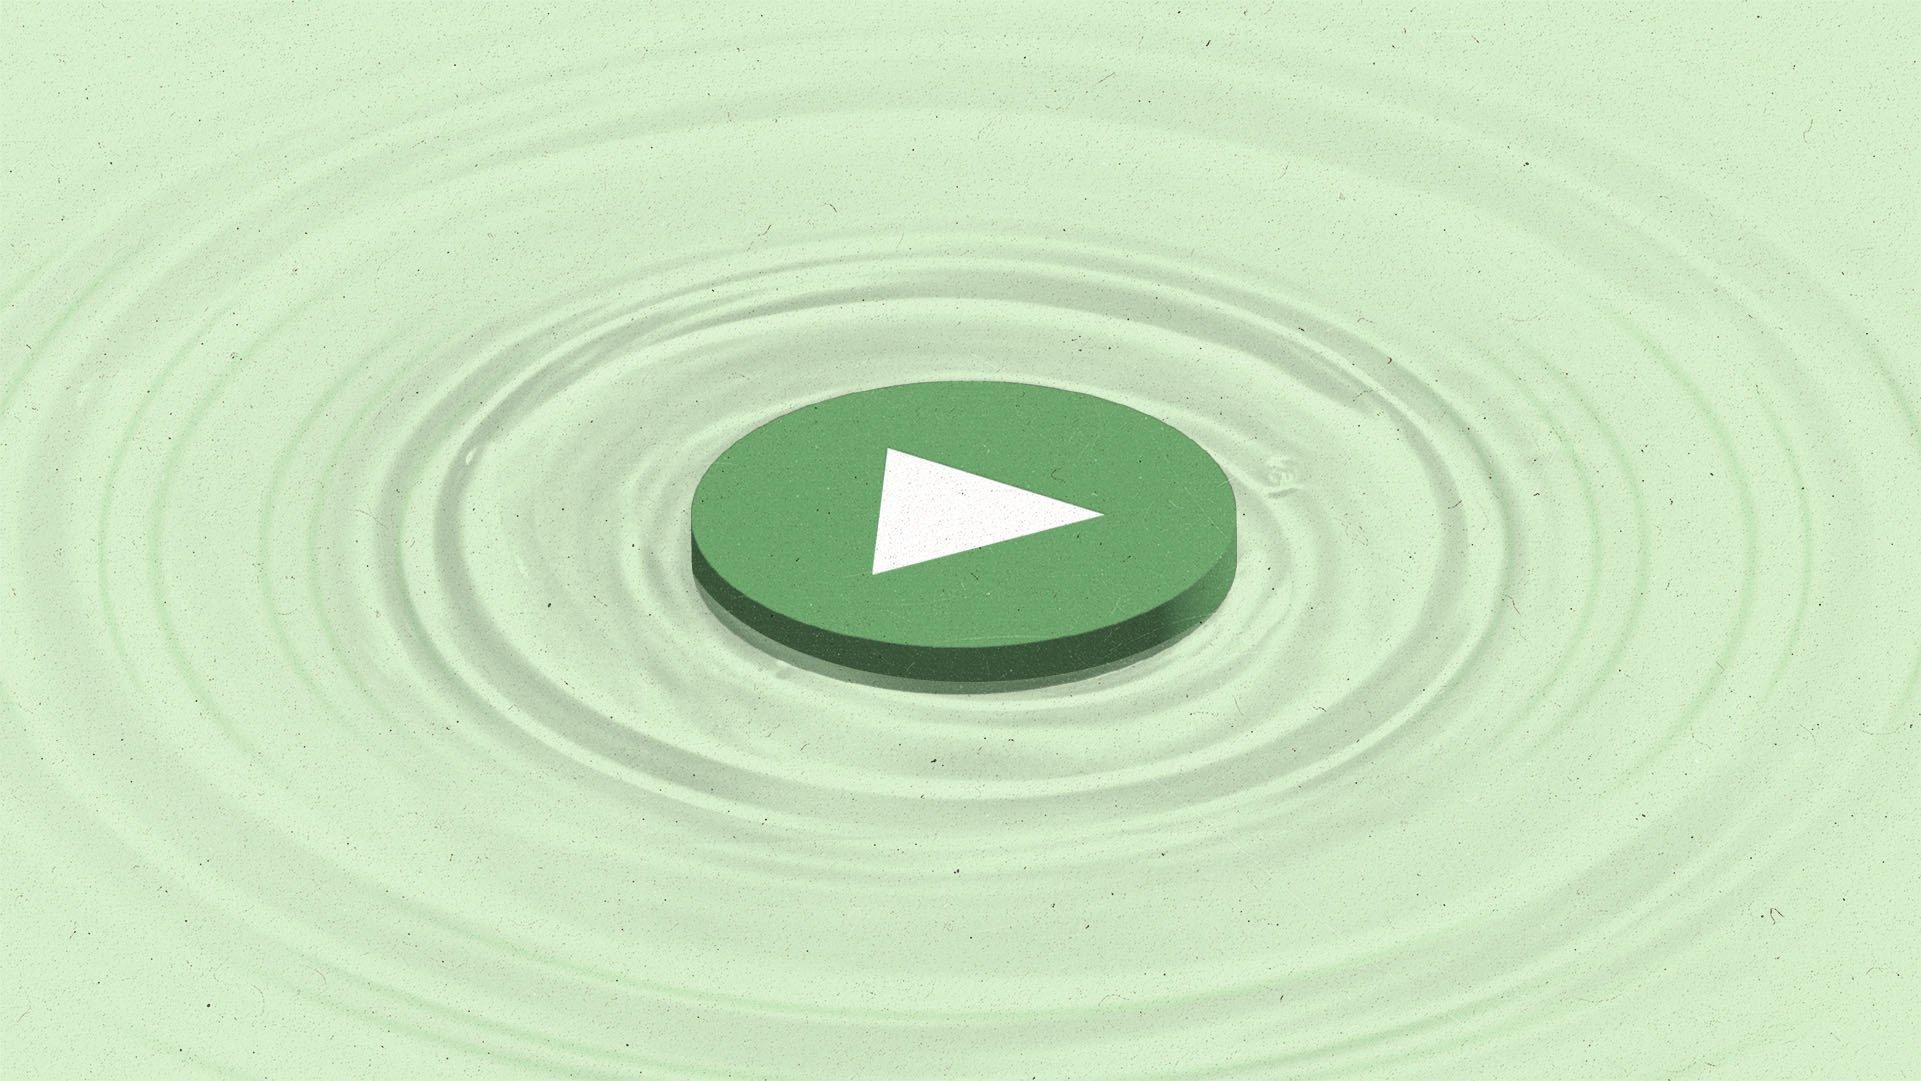 a green play button lilypad sits flat atop water creating concentric ripples.